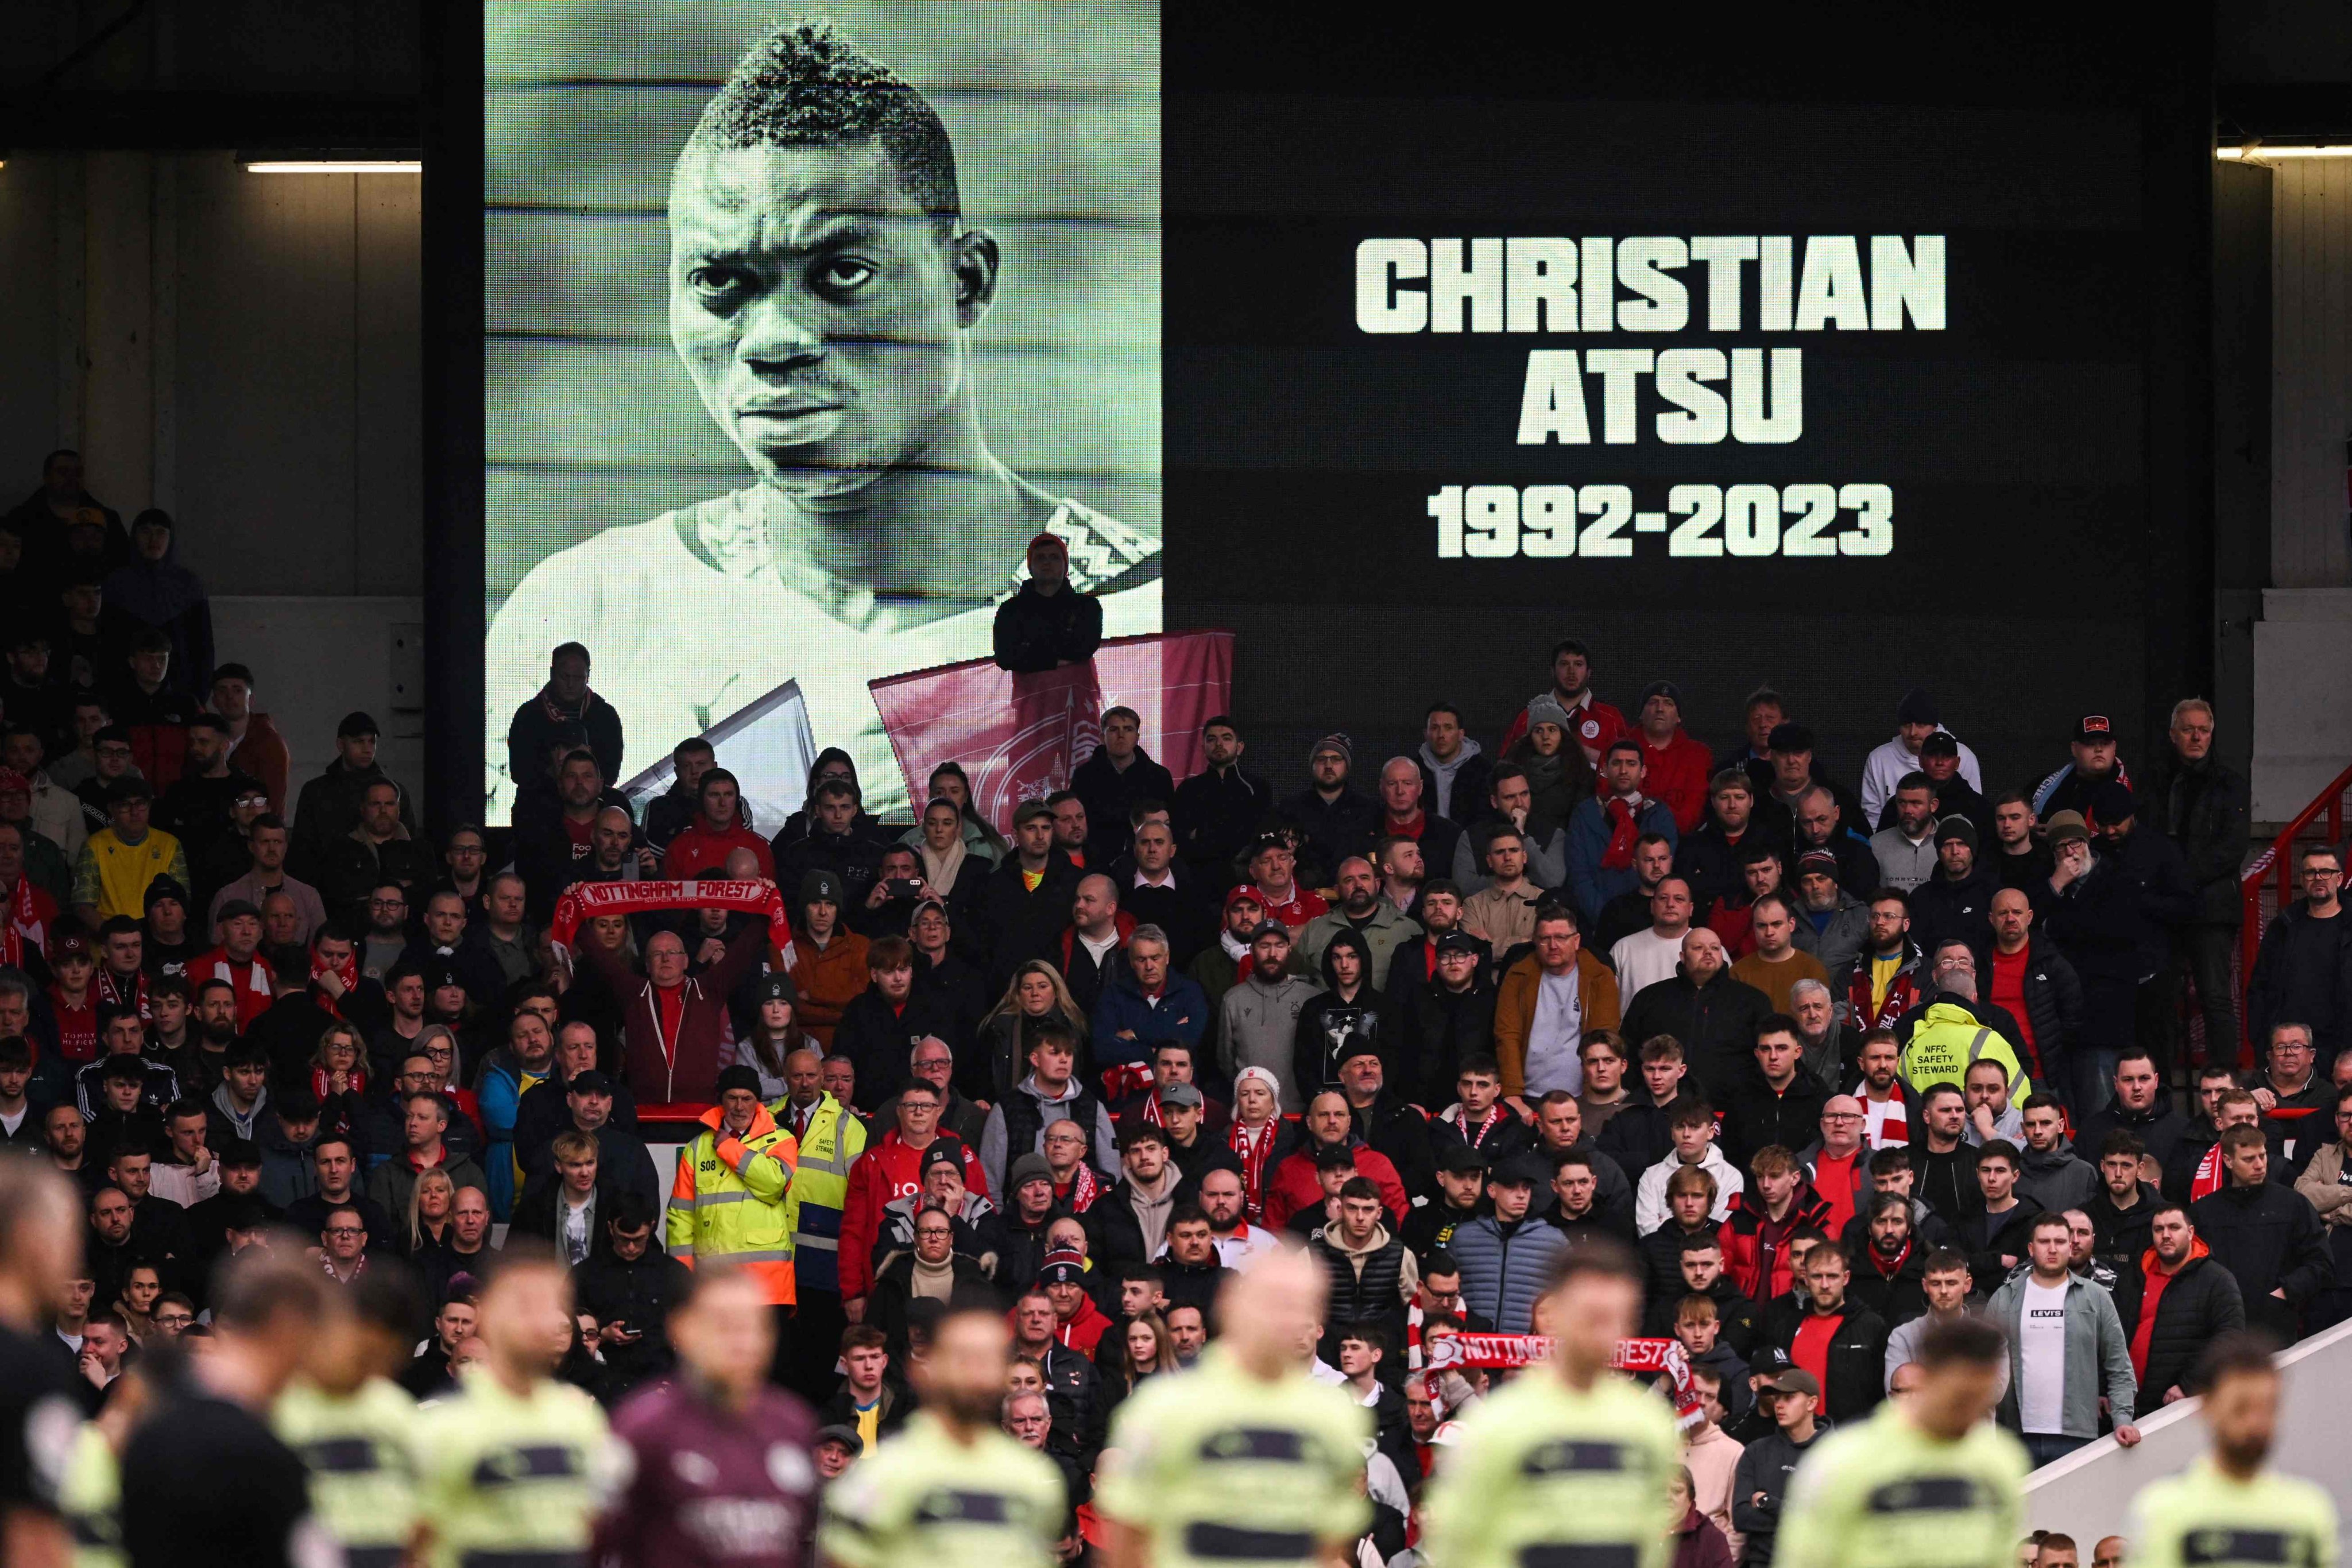 Players observe a minute of silence in tribute to Ghanaian footballer Christian Atsu, who died during the earthquake in Turkey, before the English Premier League football match between Nottingham Forest and Manchester City at The City Ground in Nottingham, UK on Saturday. Photo: AFP